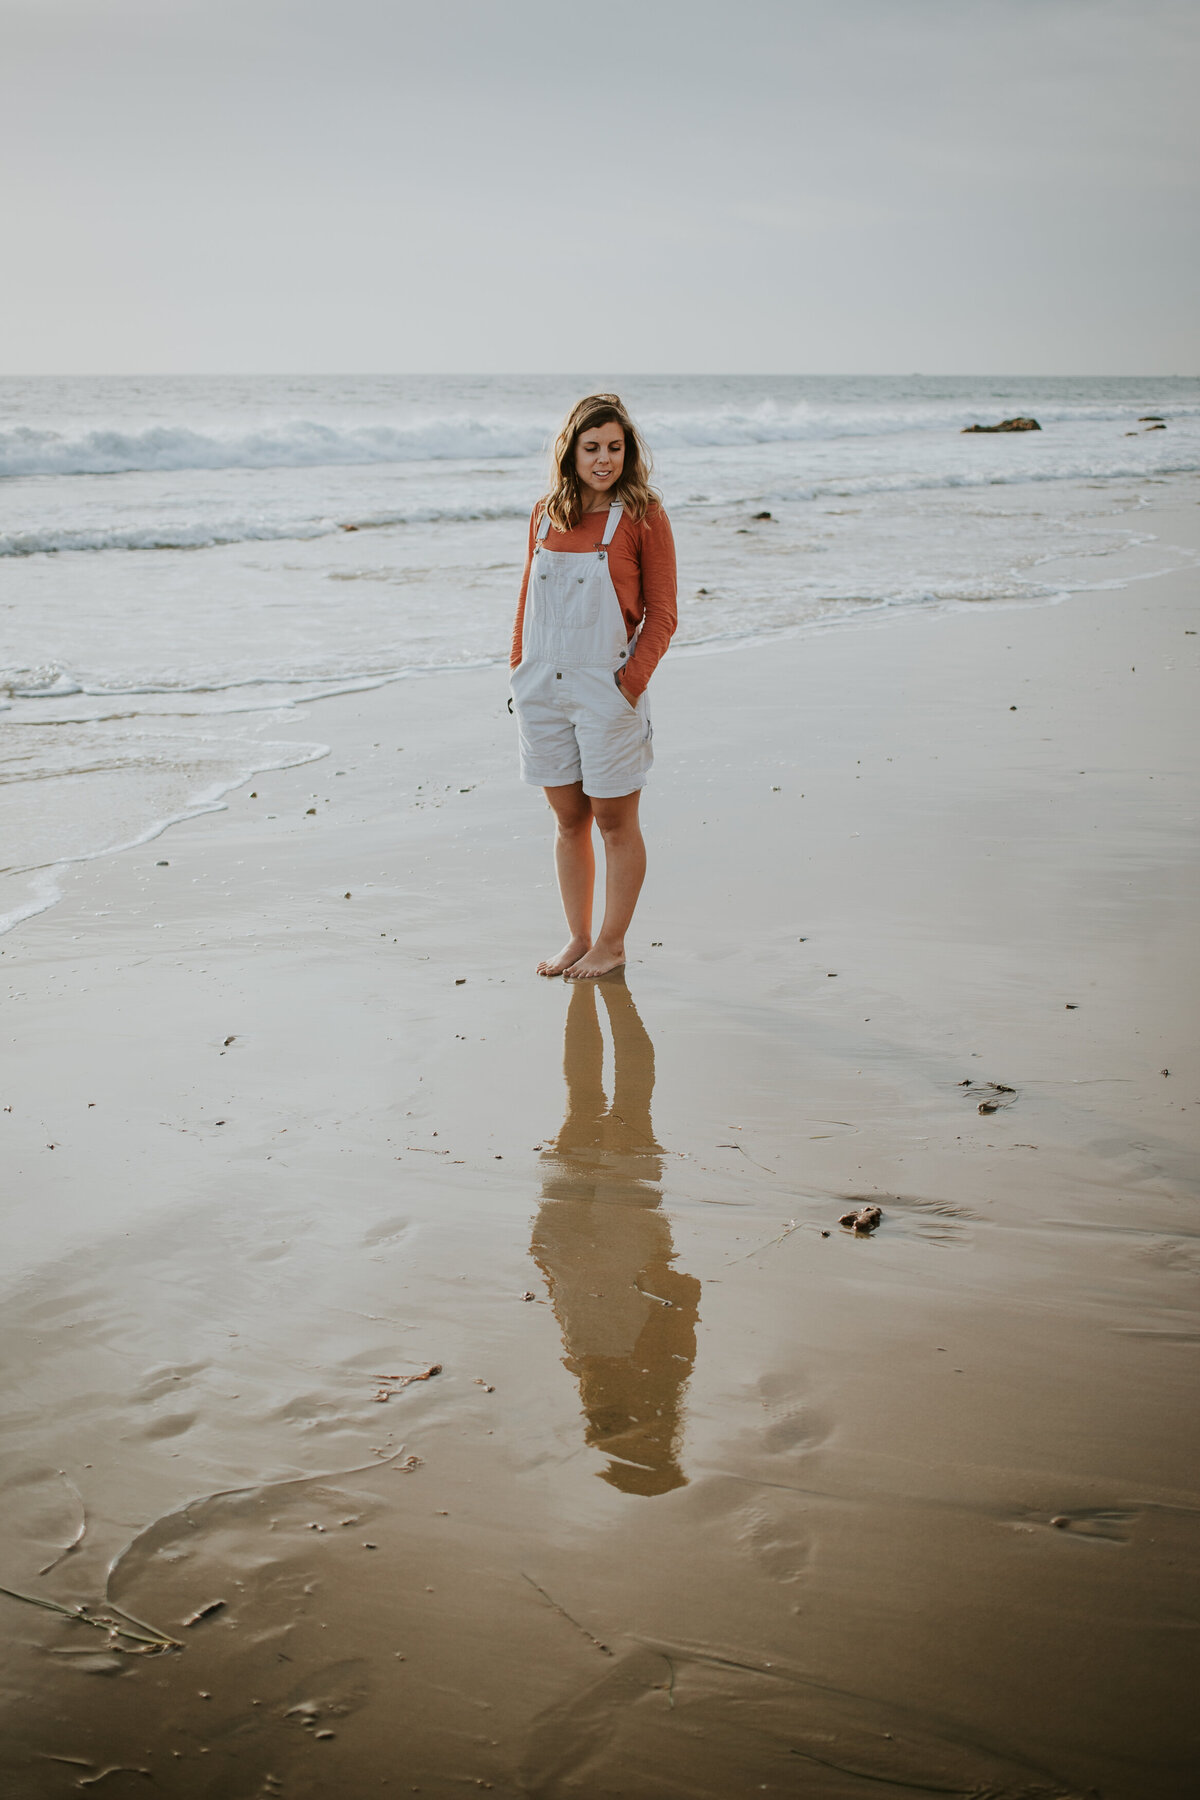 Young woman in overalls stands on beach while looking at reflection in wet sand.